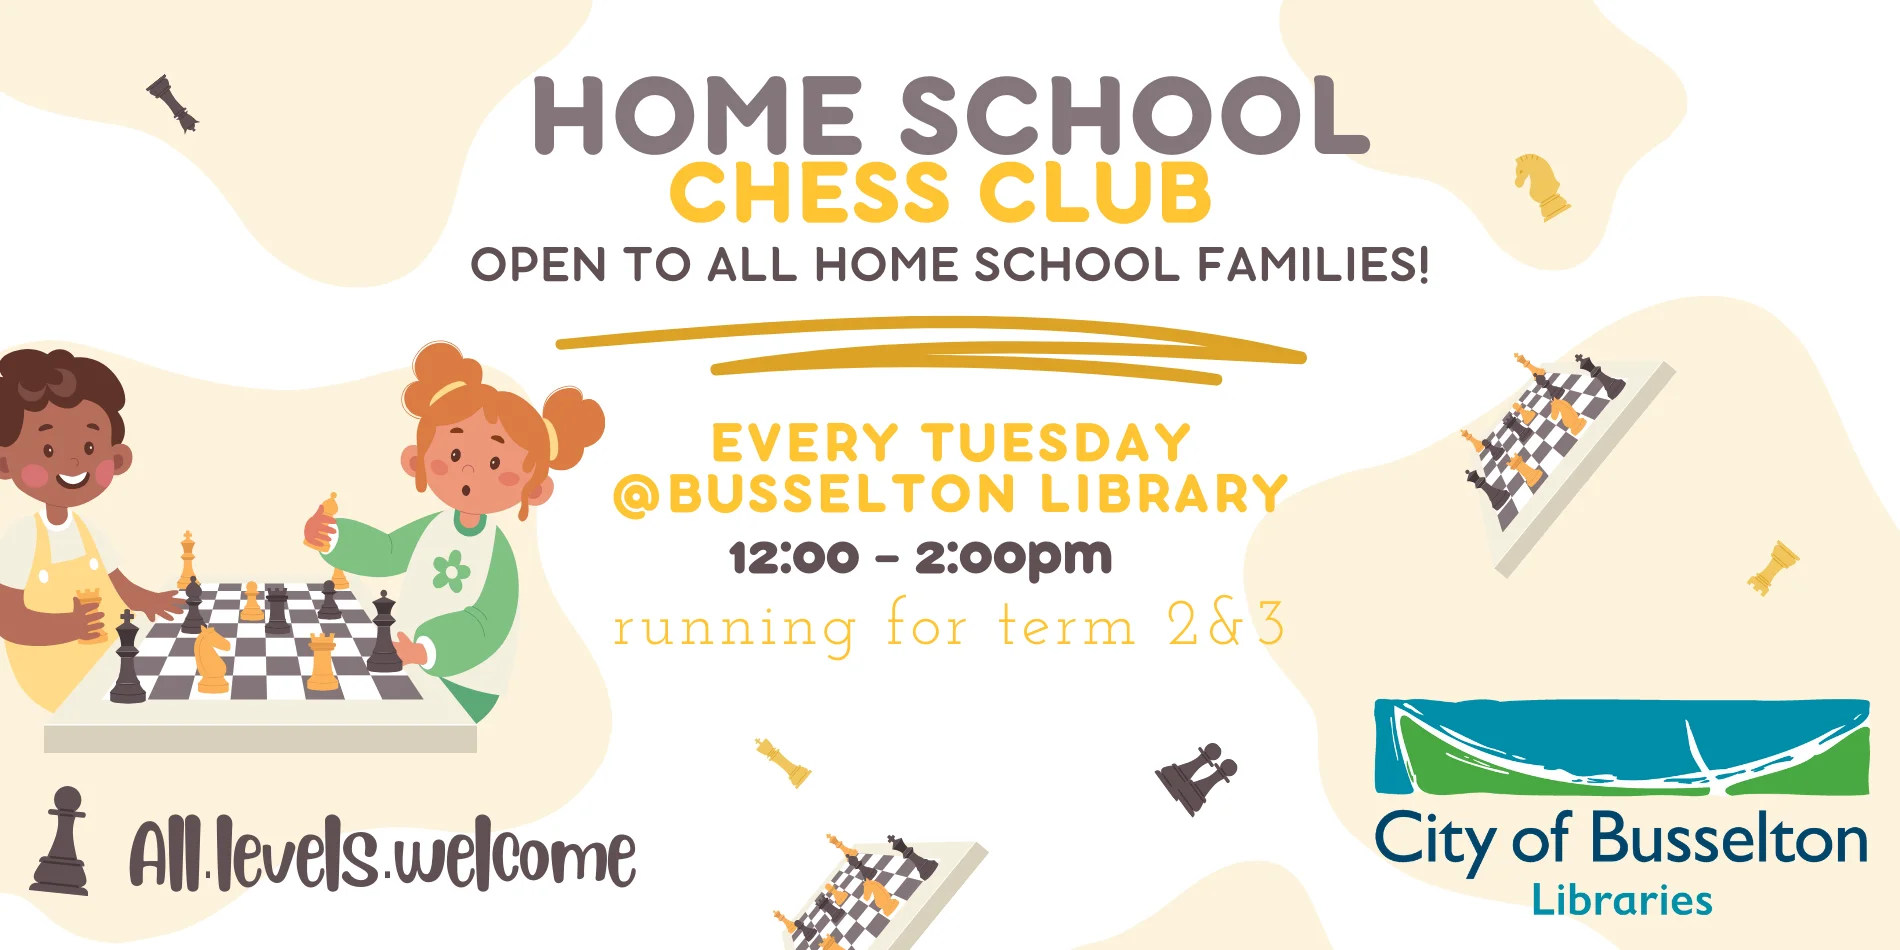 HomeSchool Chess club, held in the busselton Library every tuesday for terms 2 and 3. no bookings required